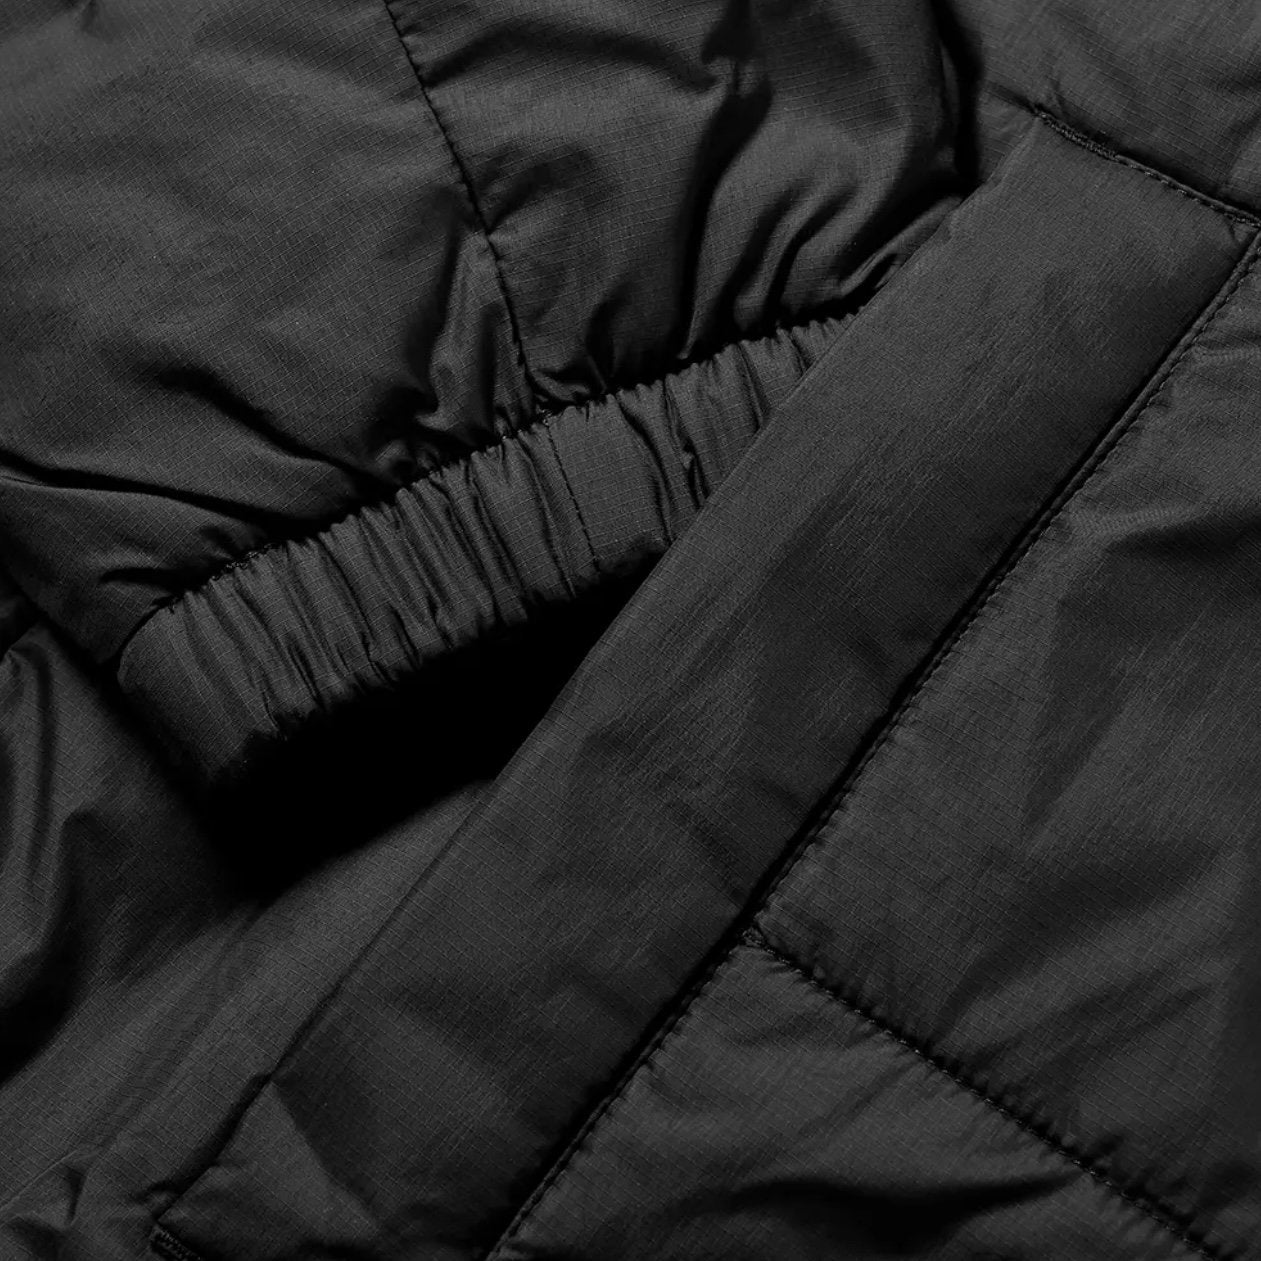 The North Face Black Coat Coat The North Face 